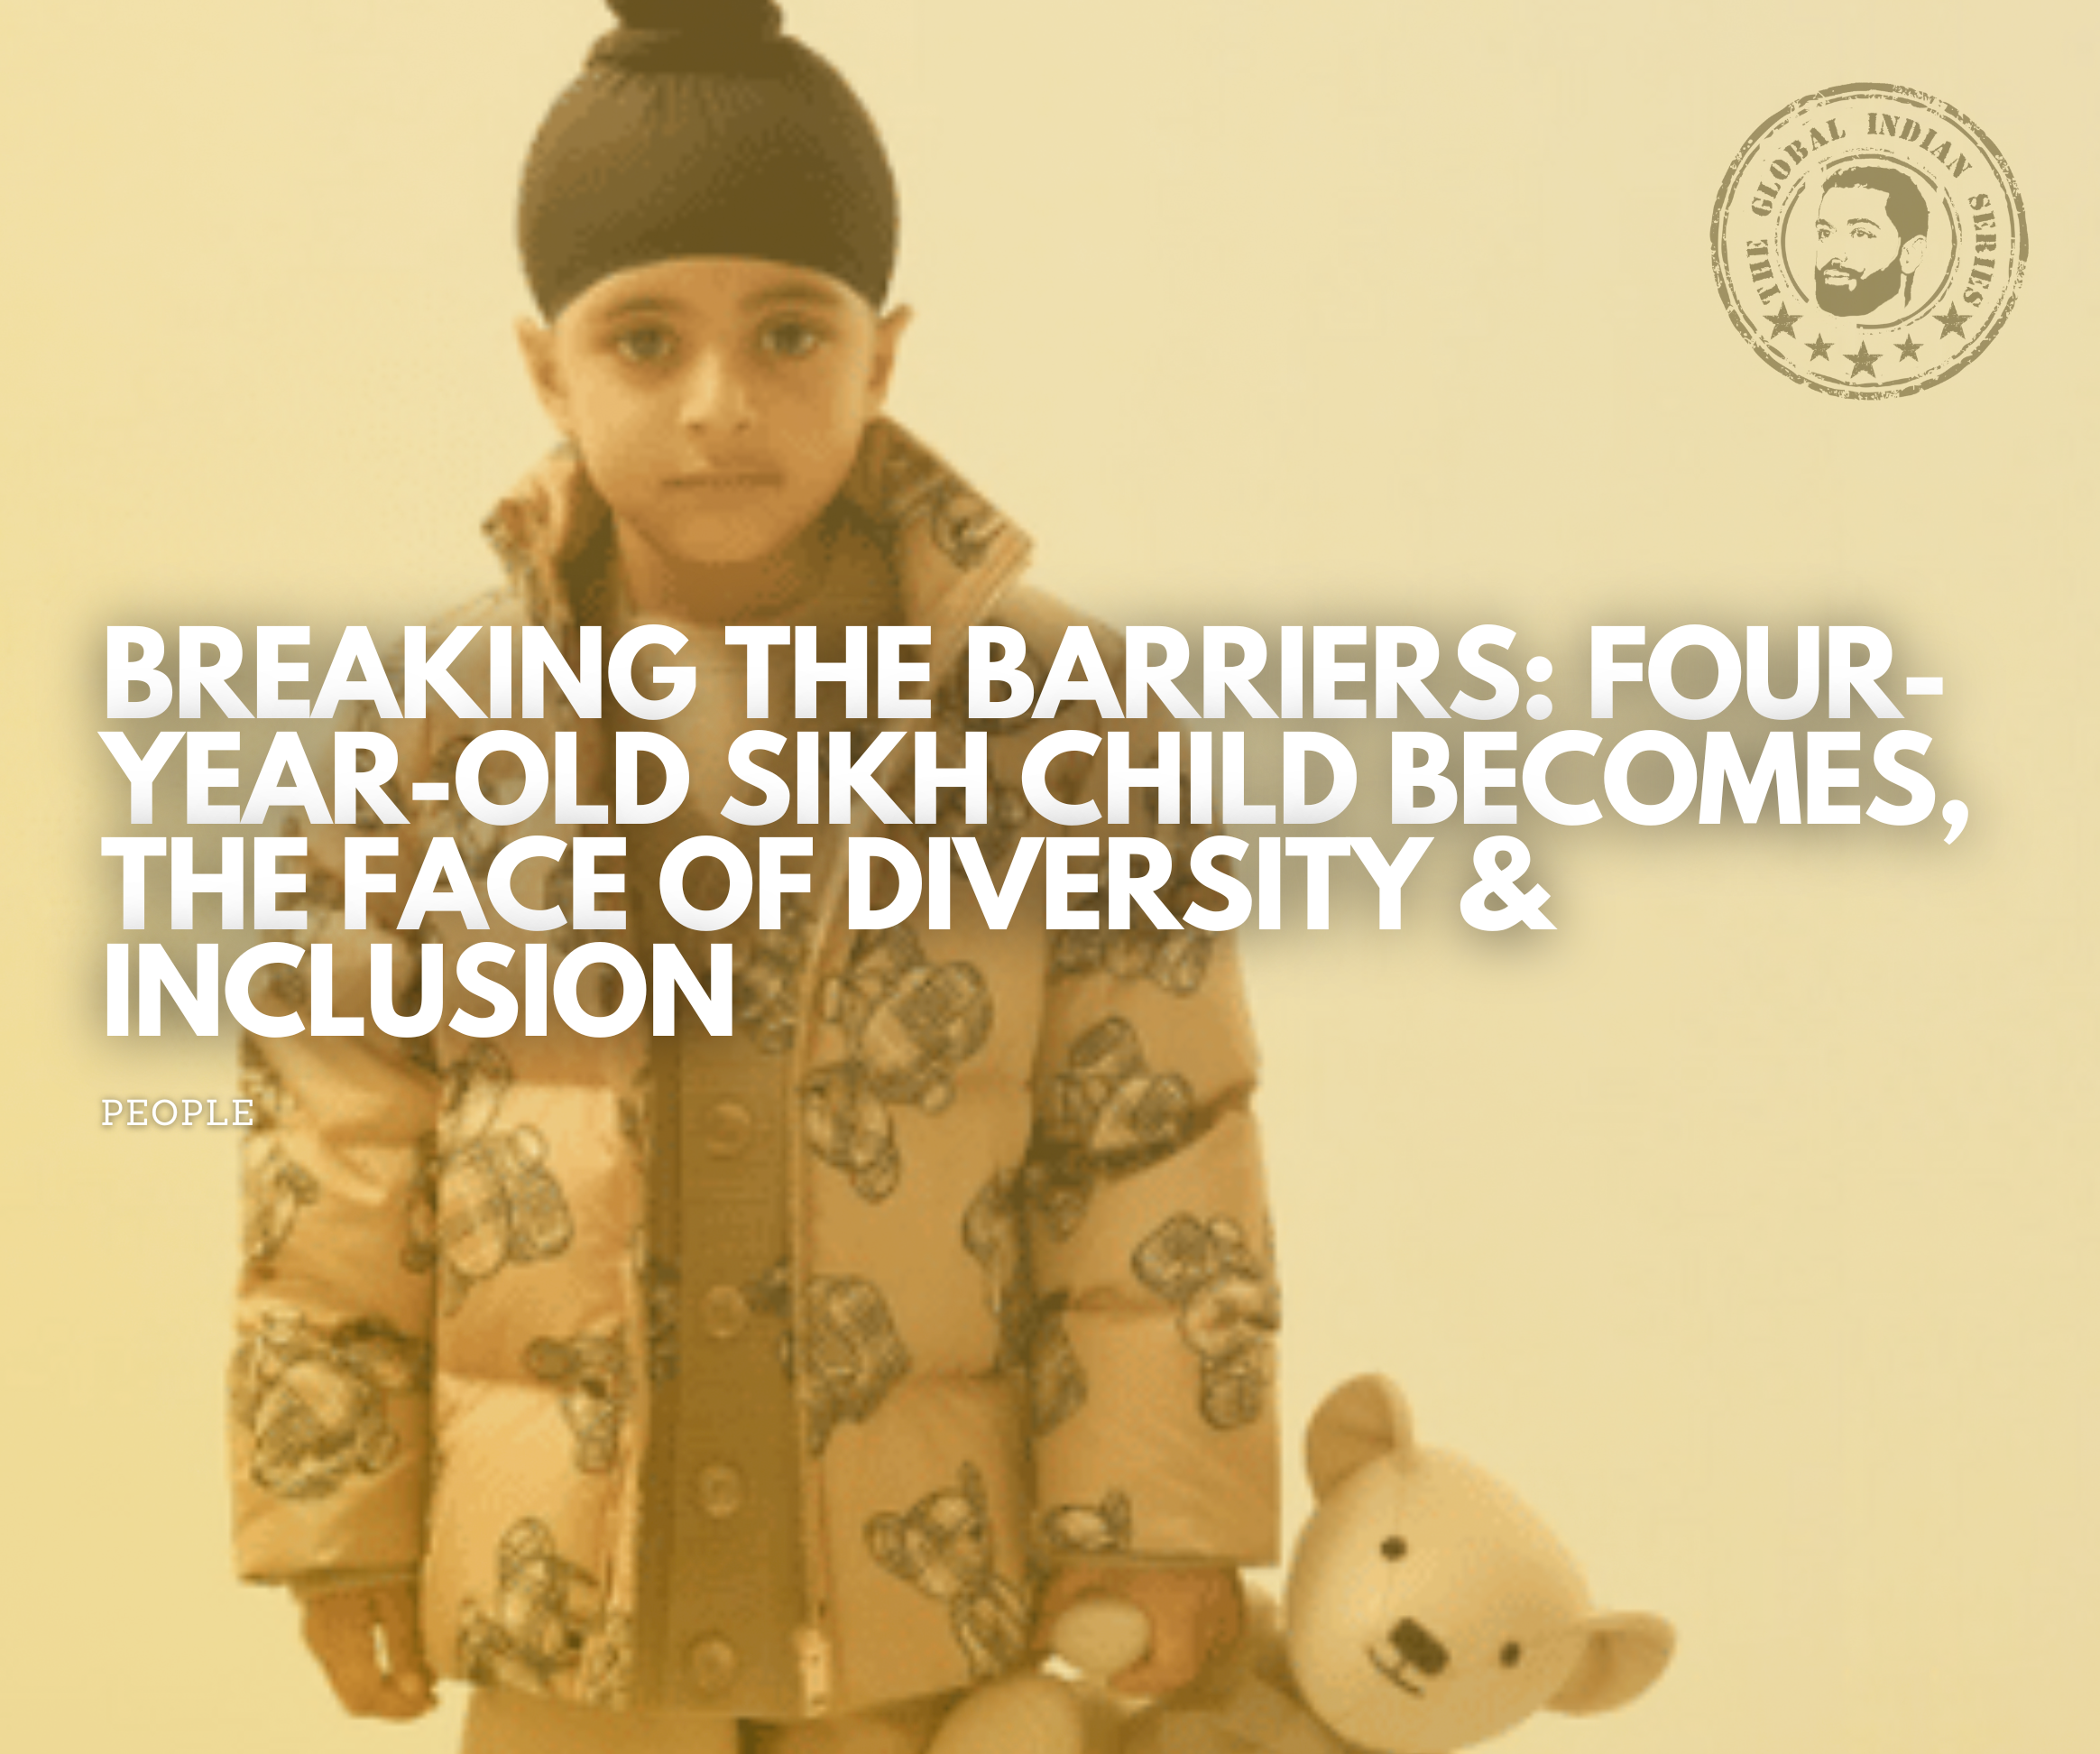 Breaking the Barriers: Four-Year-Old Sikh Child The Face of Diversity and Inclusion, challenging the norm in reperesenting the sparse.